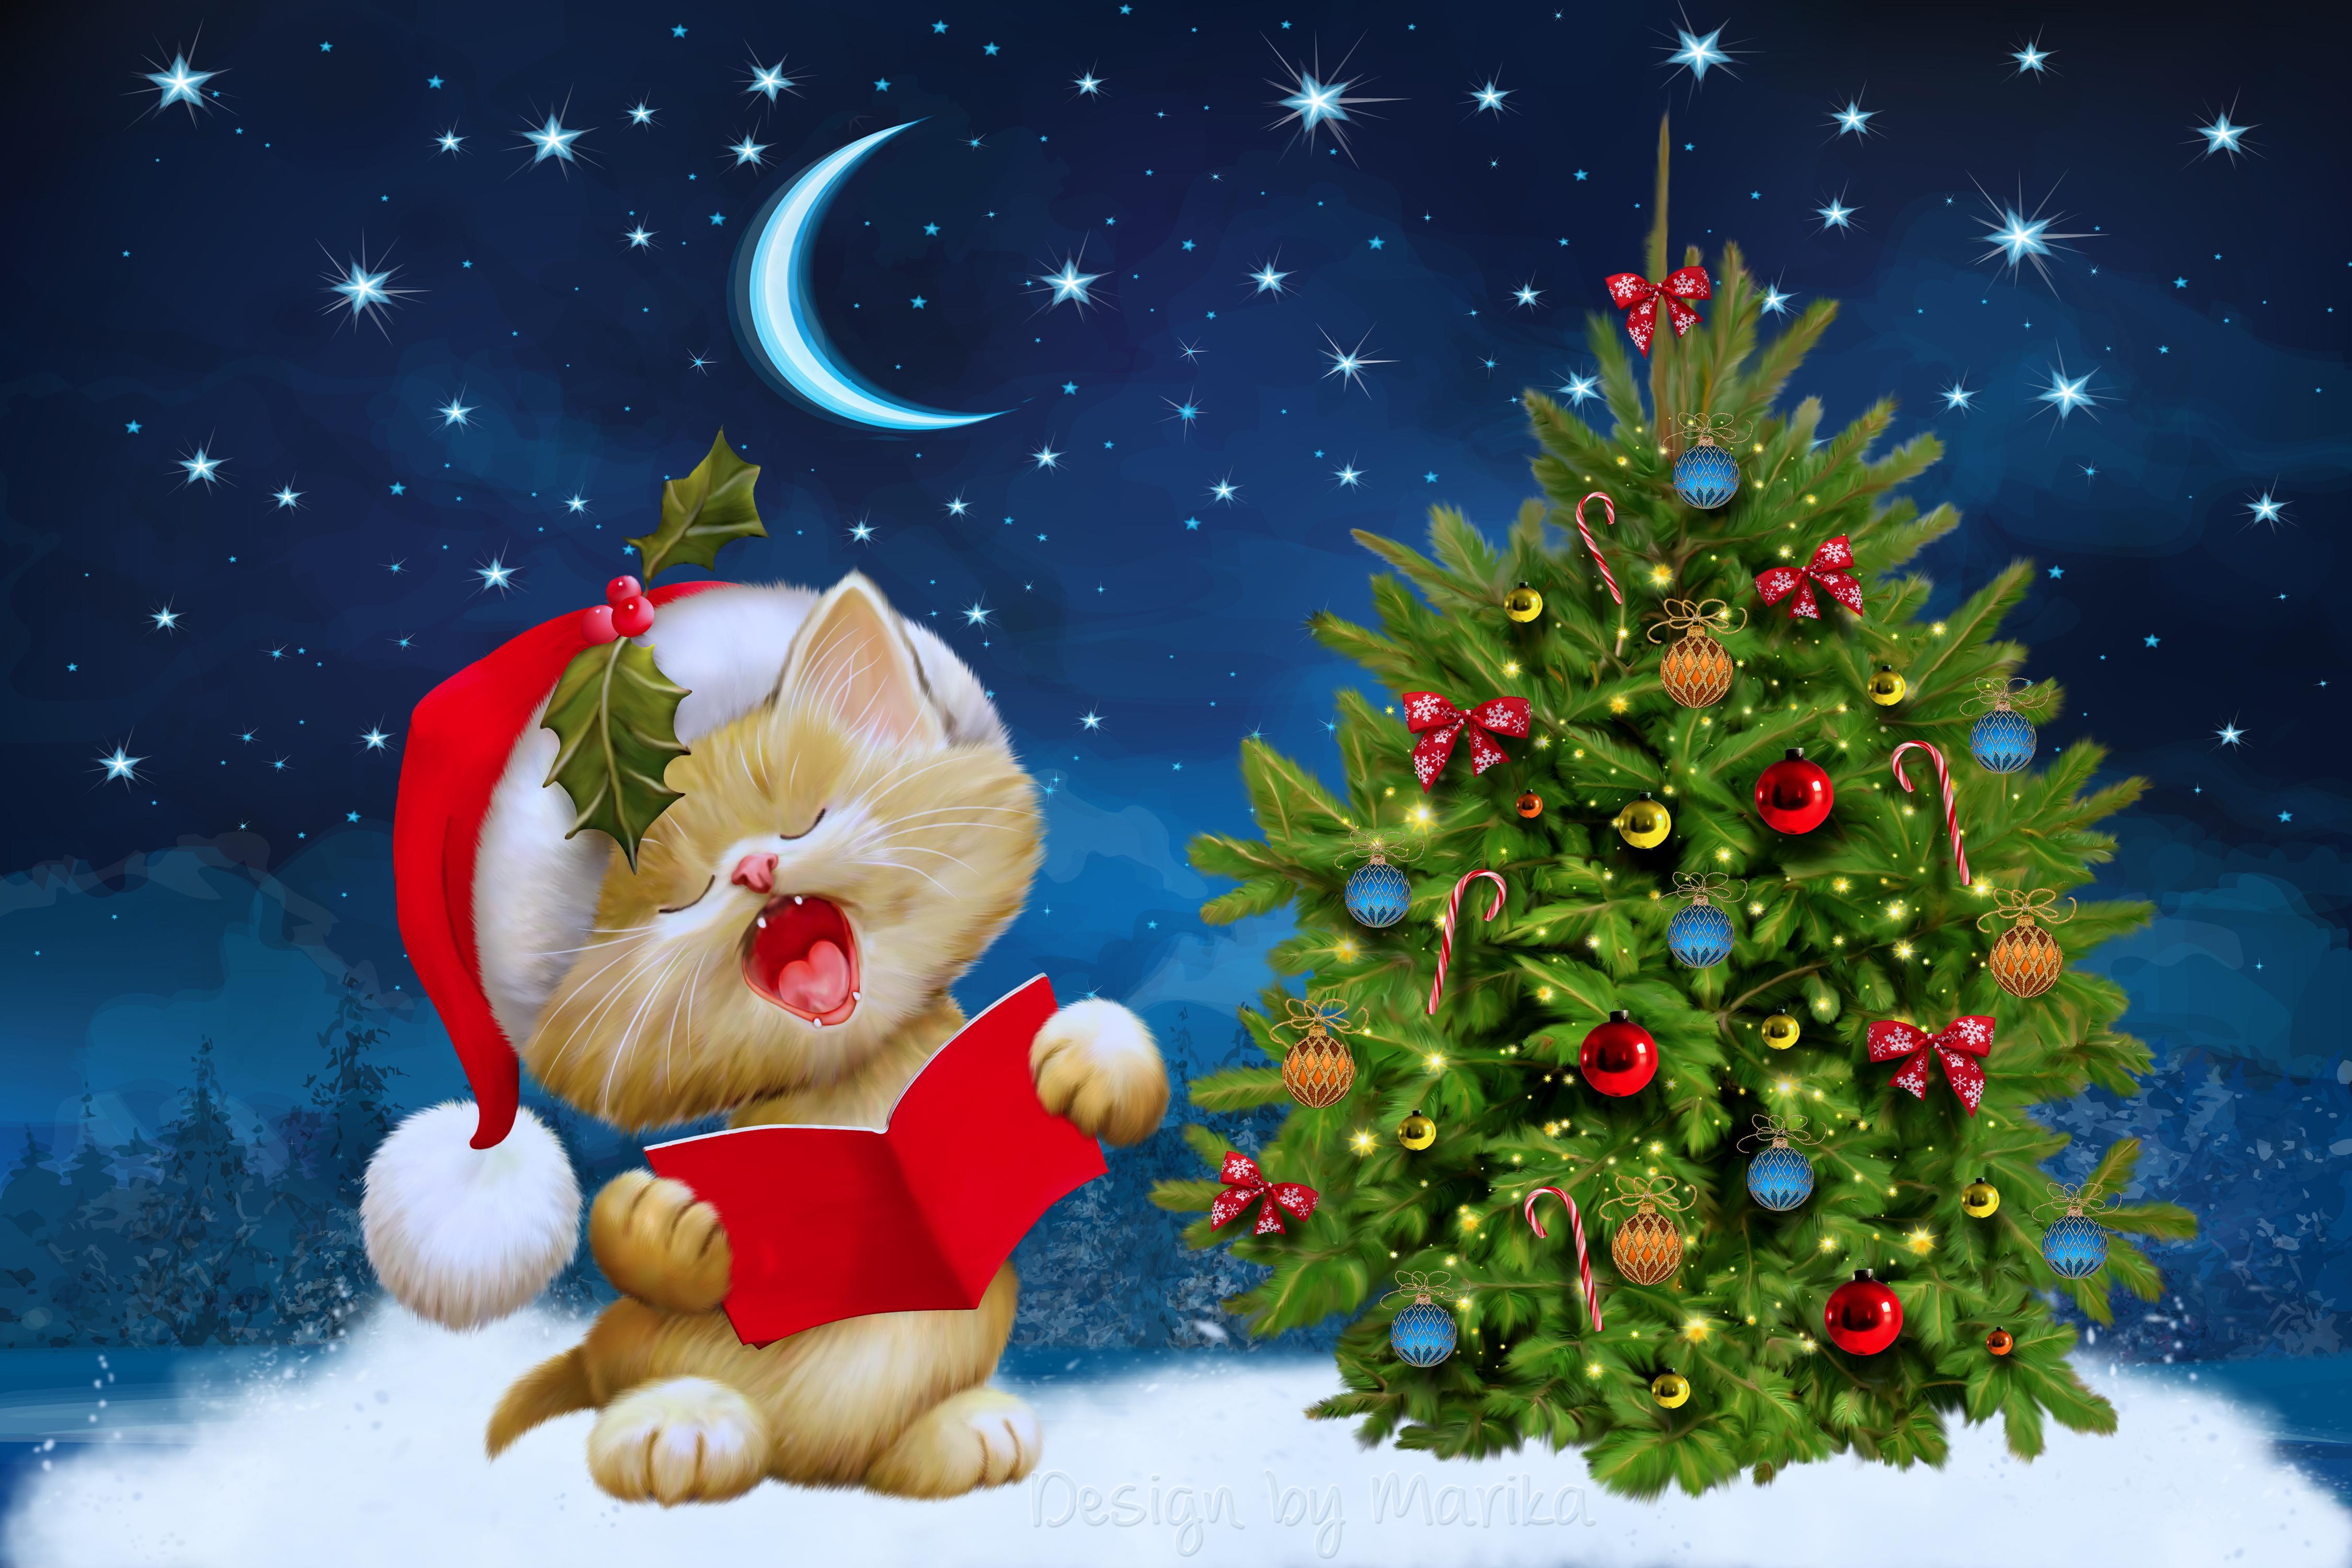 Download wallpaper 4500x3000 new year, christmas, cat, card HD